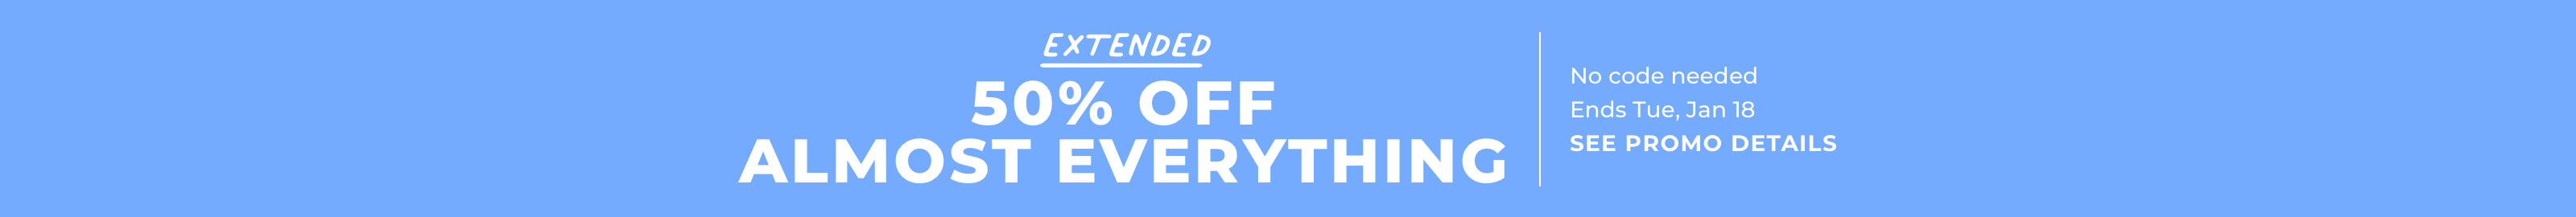 Extended 50% off almost everything, no code needed, ends Tue, Jan 18, see promo details